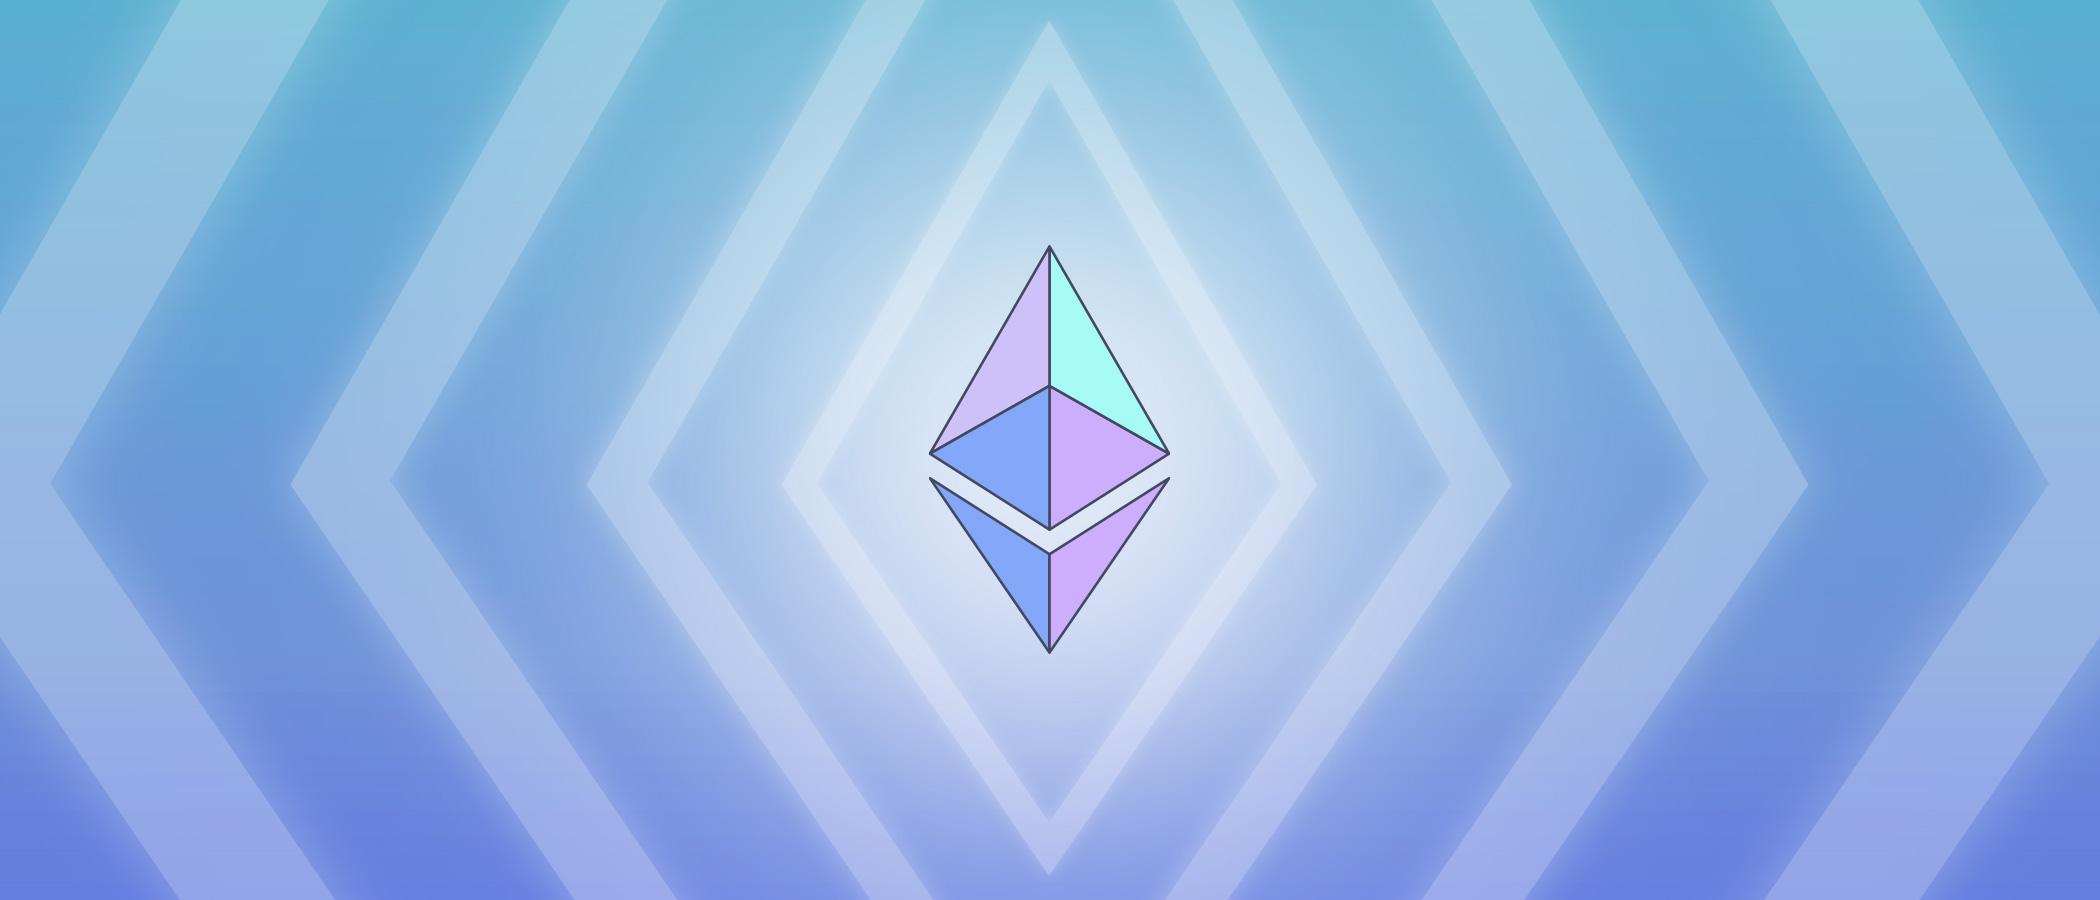 Ethereum Foundation Open Call re: Board Selection